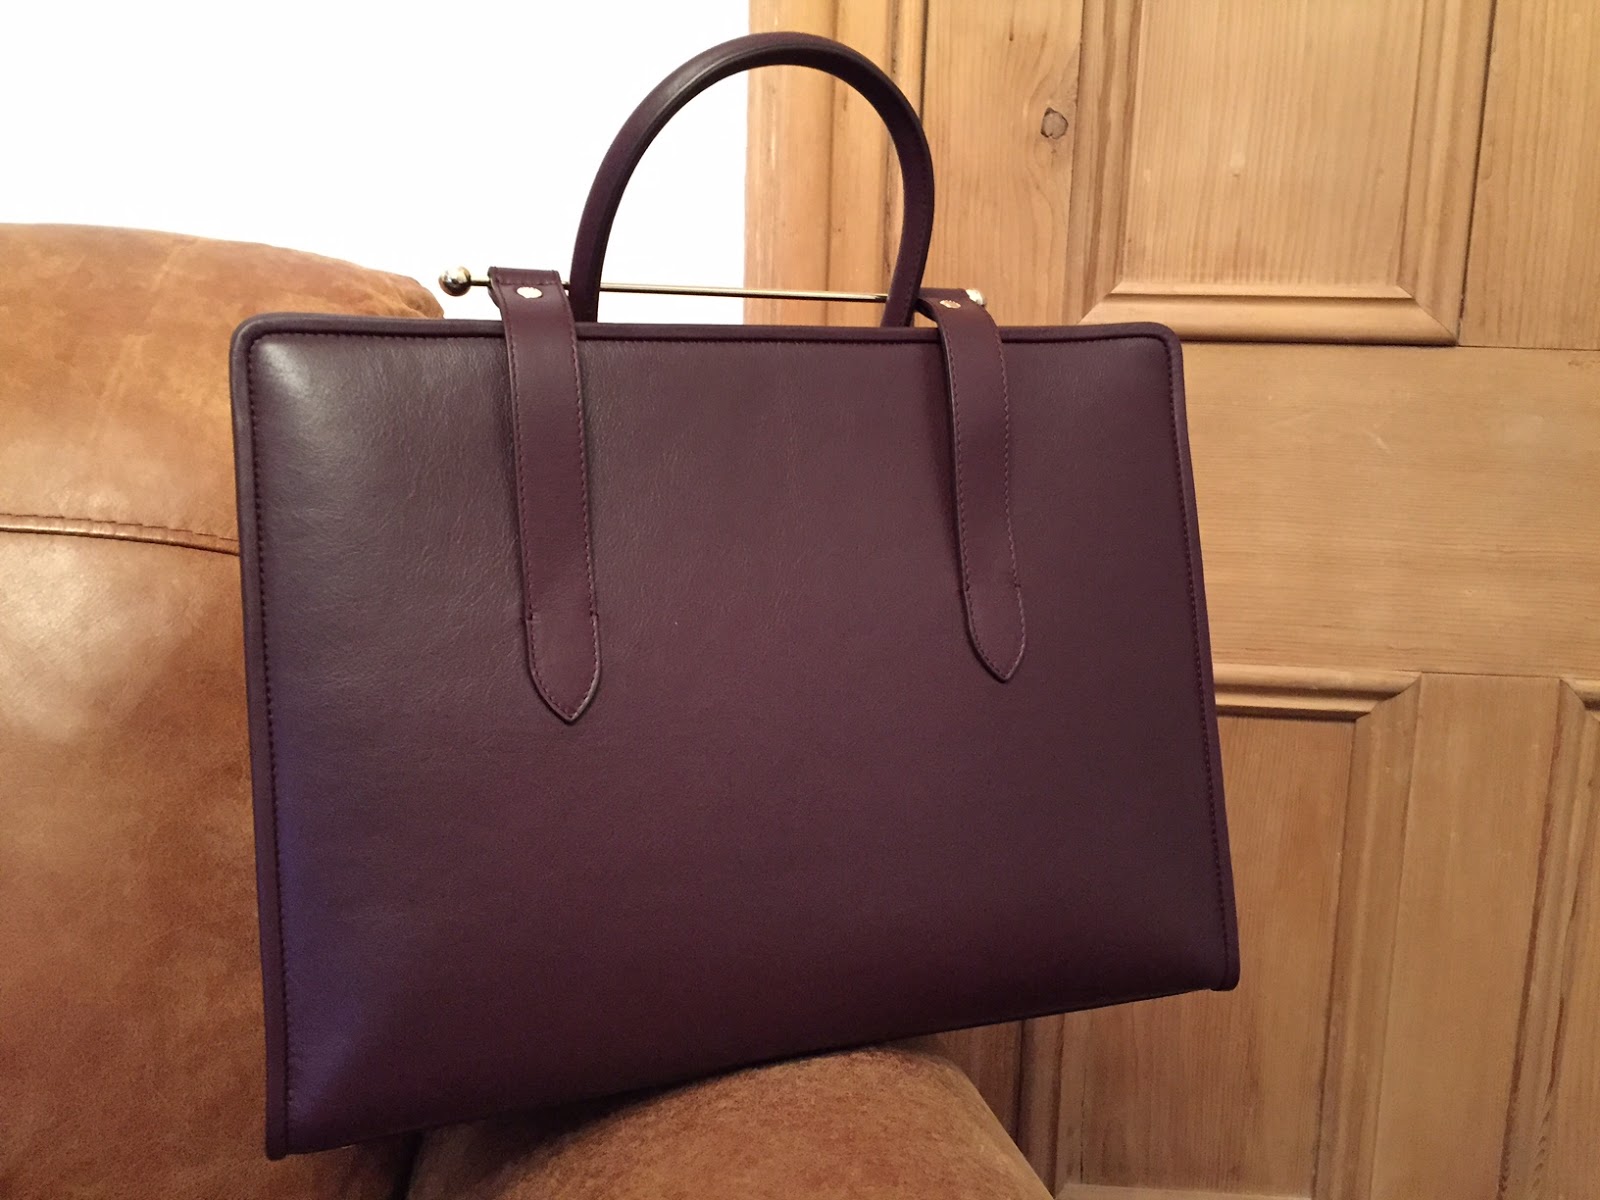 The Strathberry Tote - Mushroom with Burgundy Edge/Interior